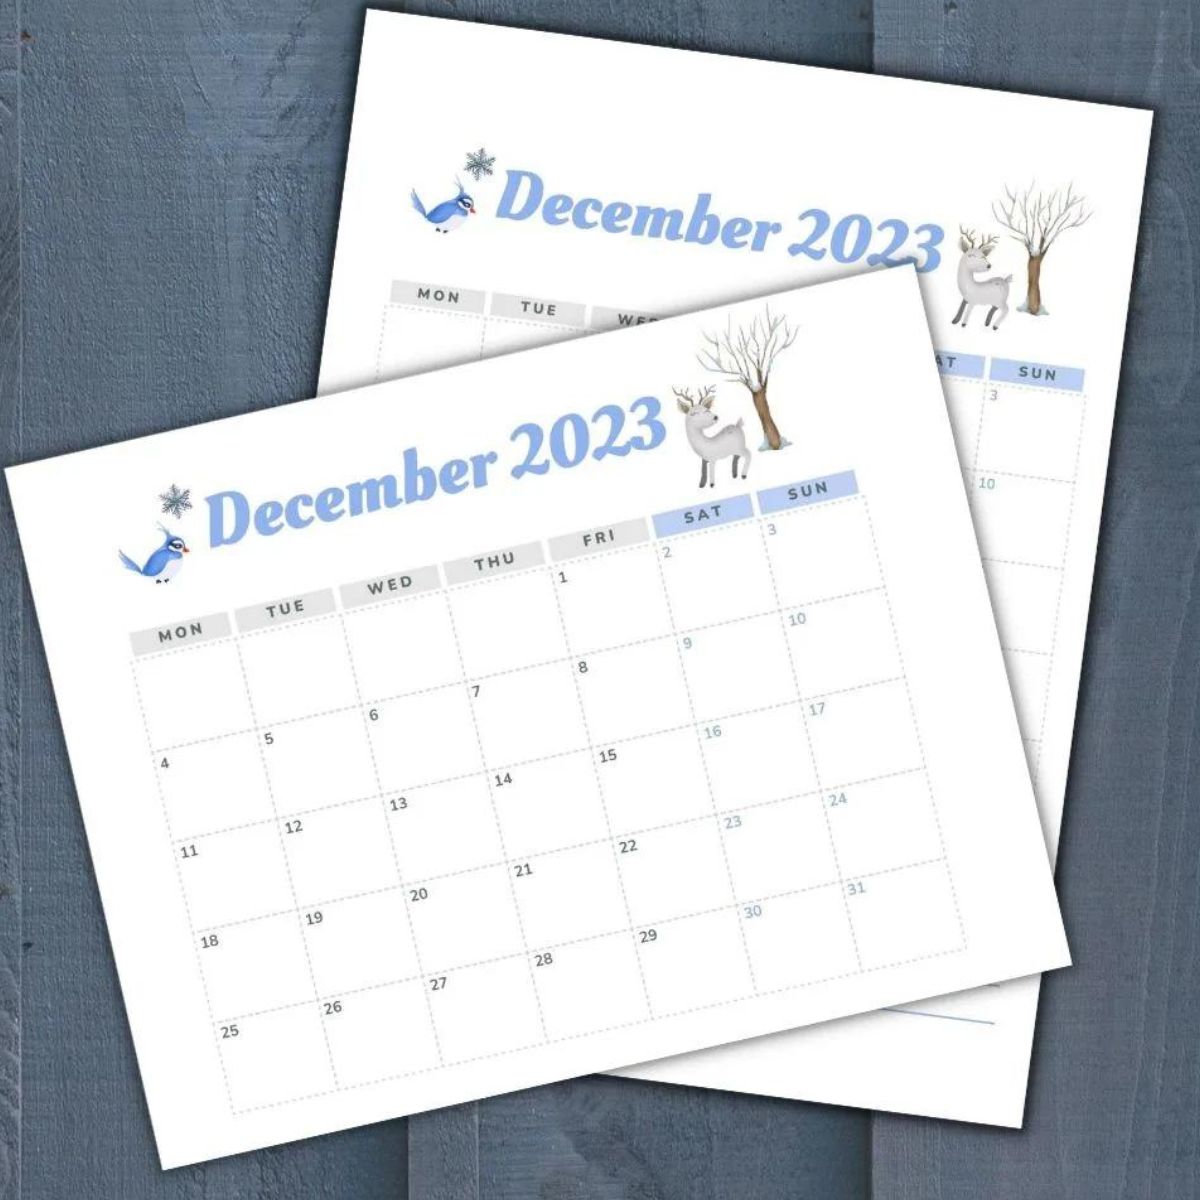 December 2023 calendars printed out